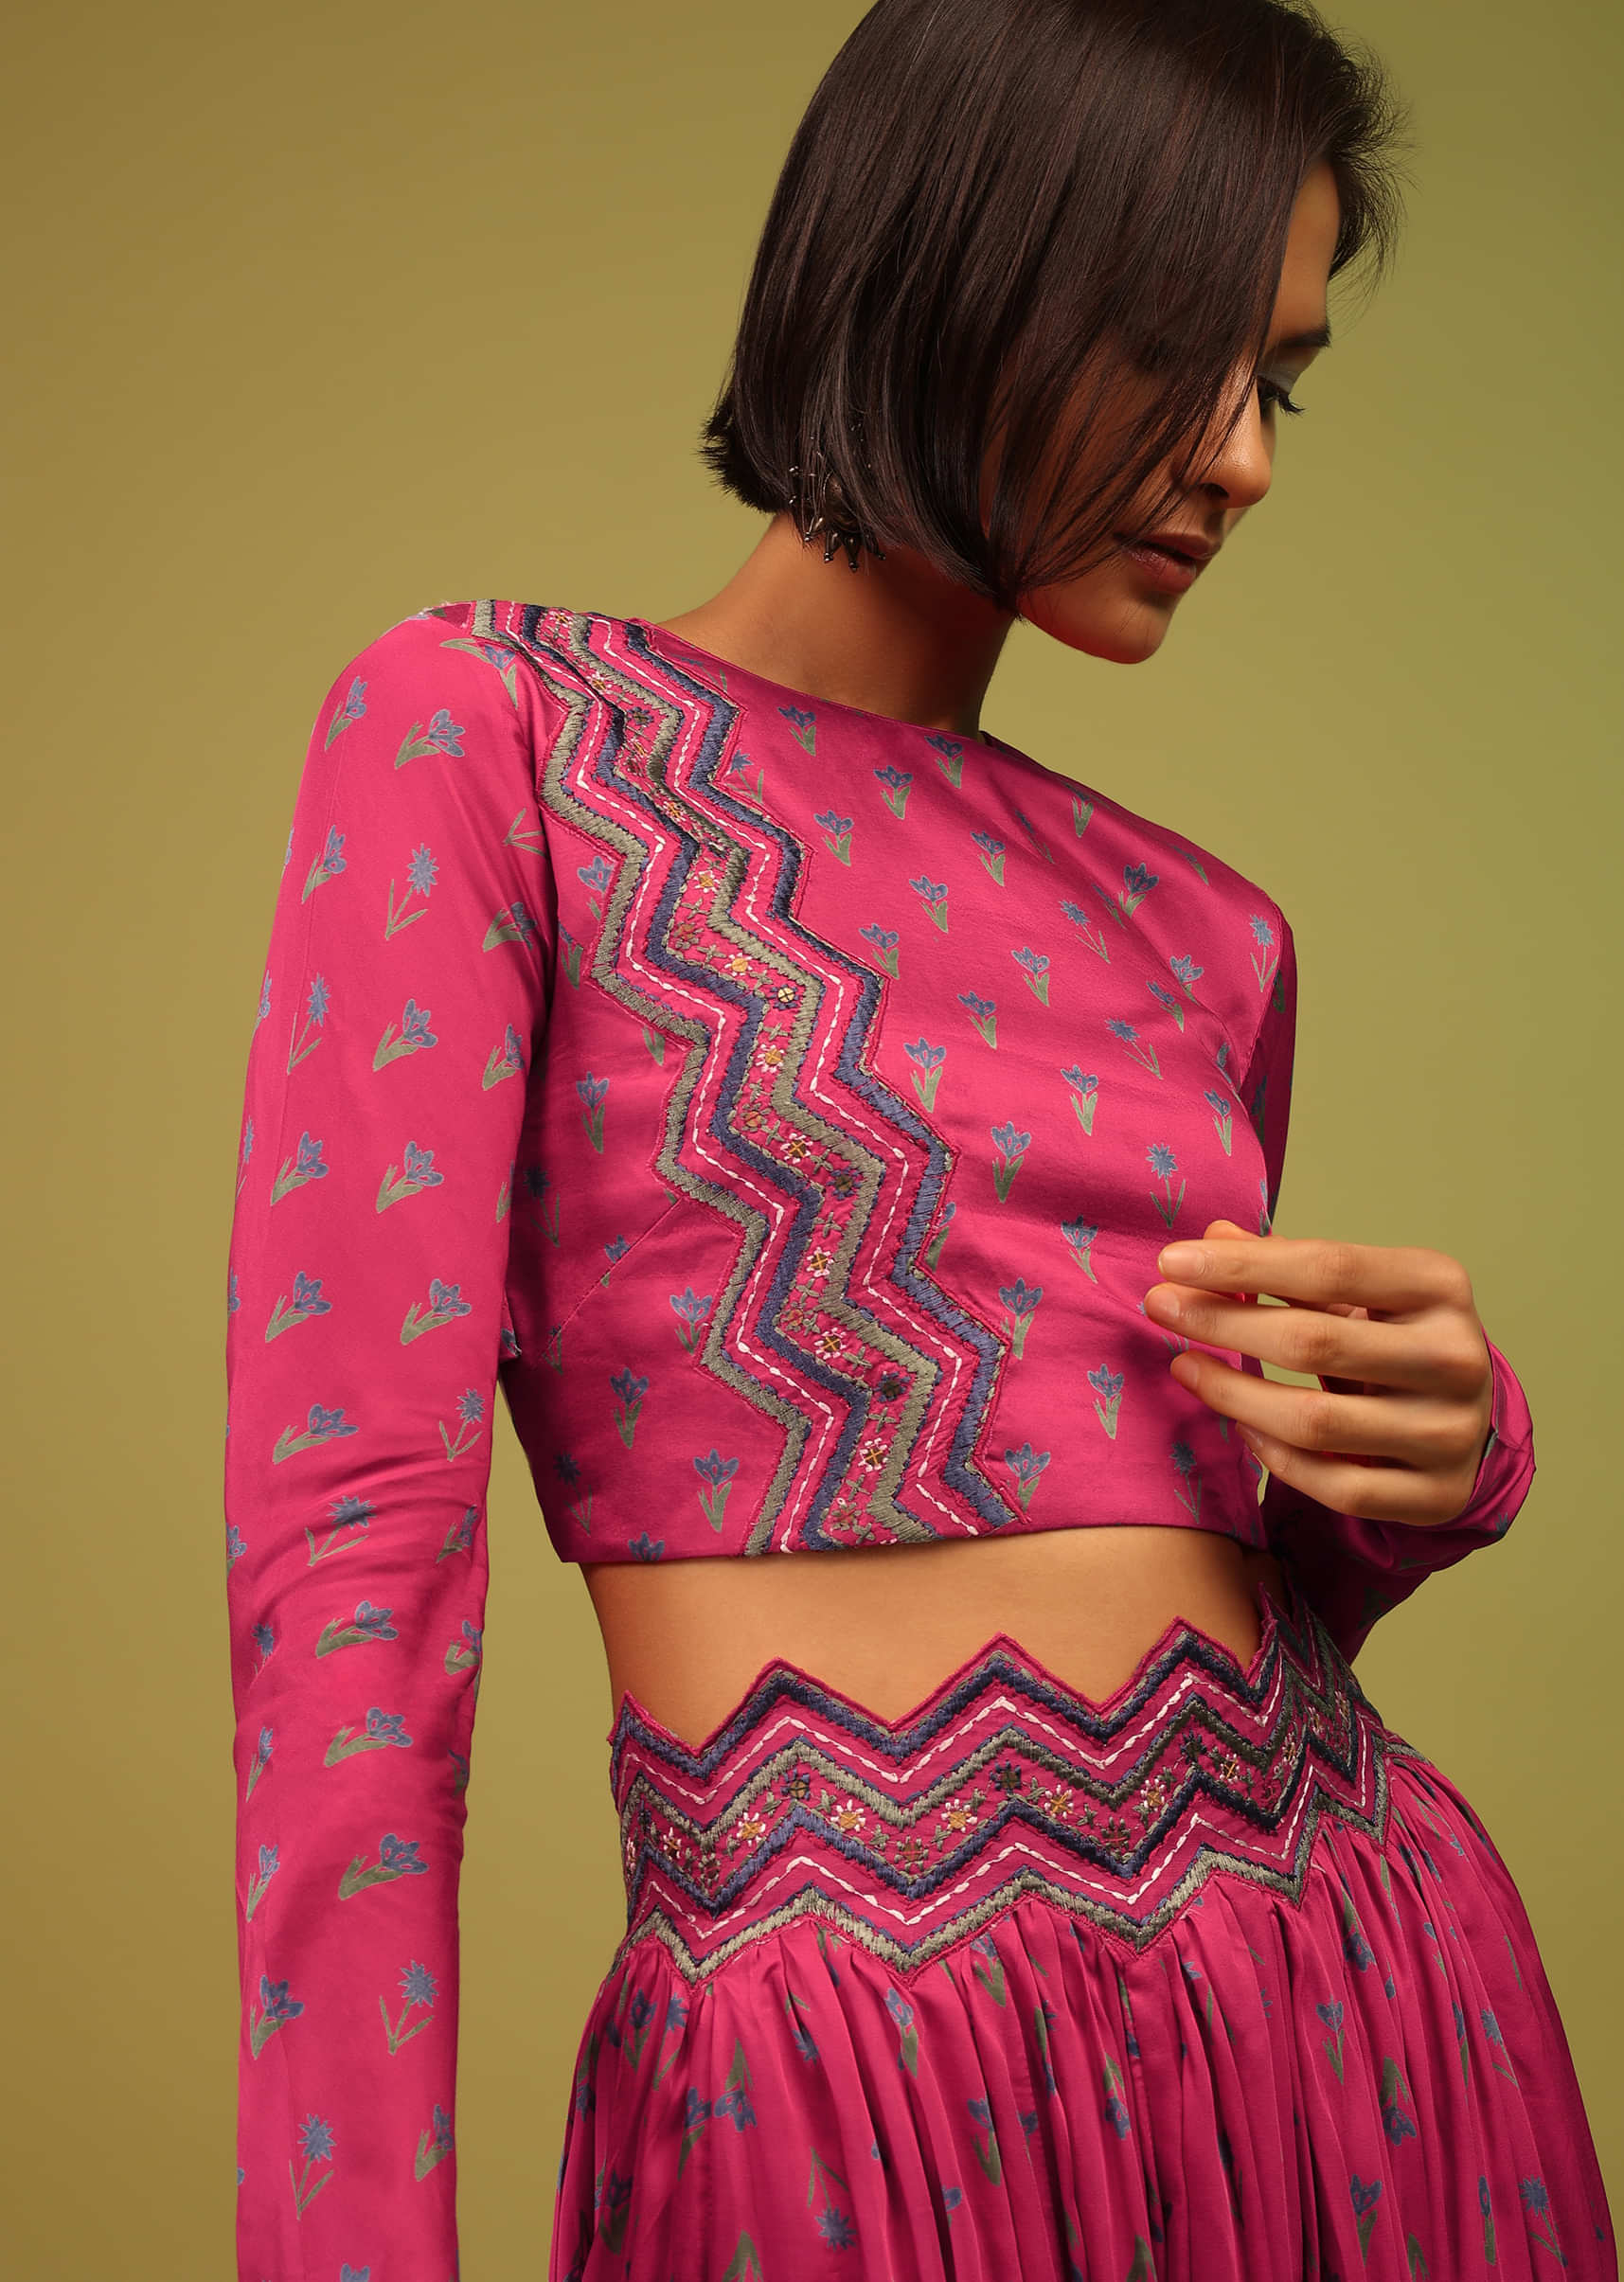 Azalea Pink Crop Top And Lehenga In Cotton Silk With Floral Print & Embroidery